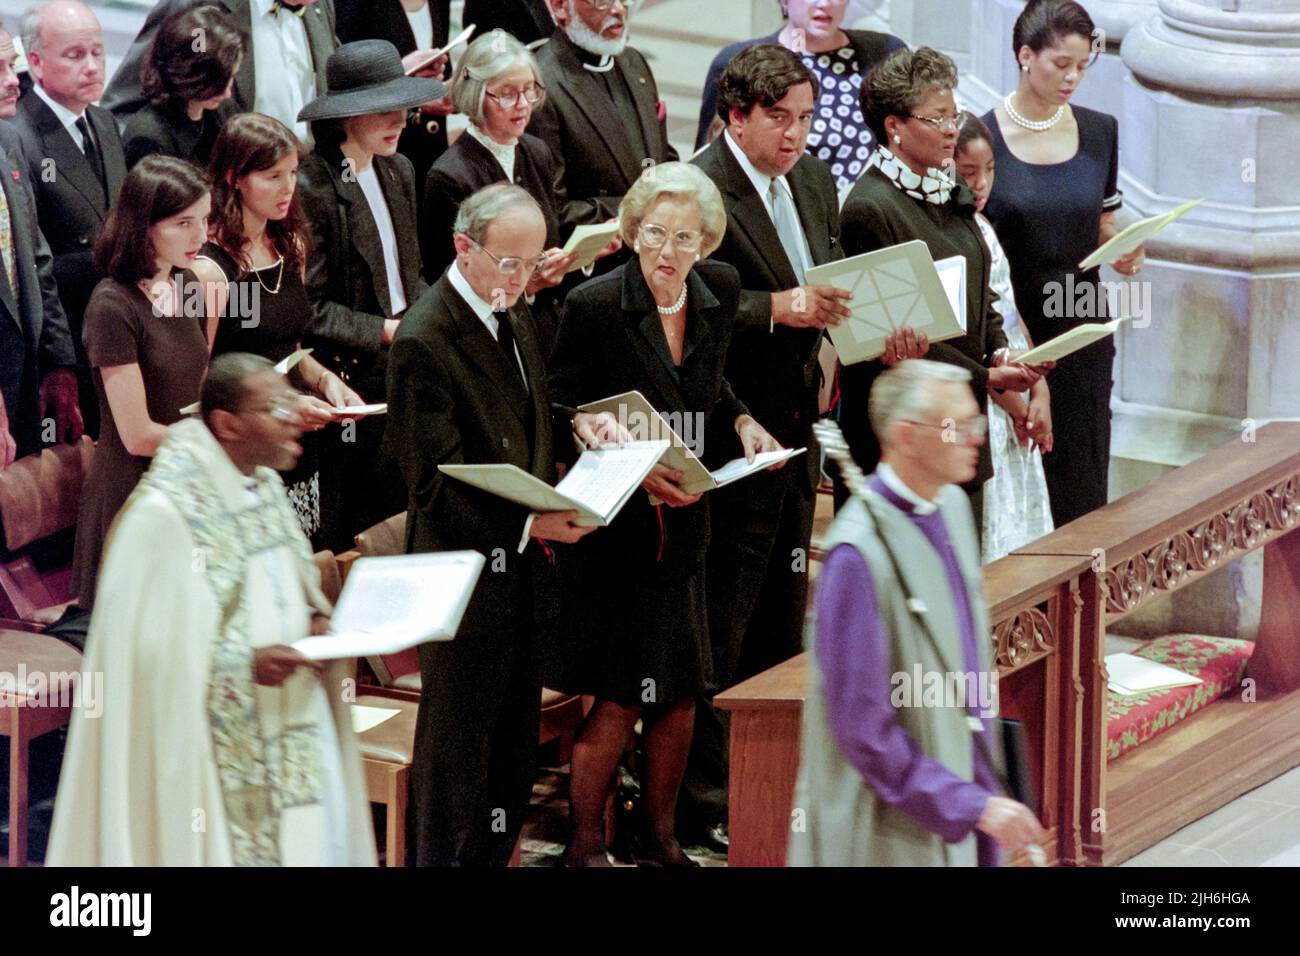 British Ambassador to the U.S. Sir John Kerr, center, joins in singing Hymn 608 during a memorial and prayer service to Diana, the Princess of Wales, on the occasion of her death at the Washington National Cathedral, September 6, 1997, in Washington, D.C. Standing next to Kerr are Chairwoman of the Washington Post Katharine Graham and U.S. ambassador to the United Nations Bill Richardson. Stock Photo